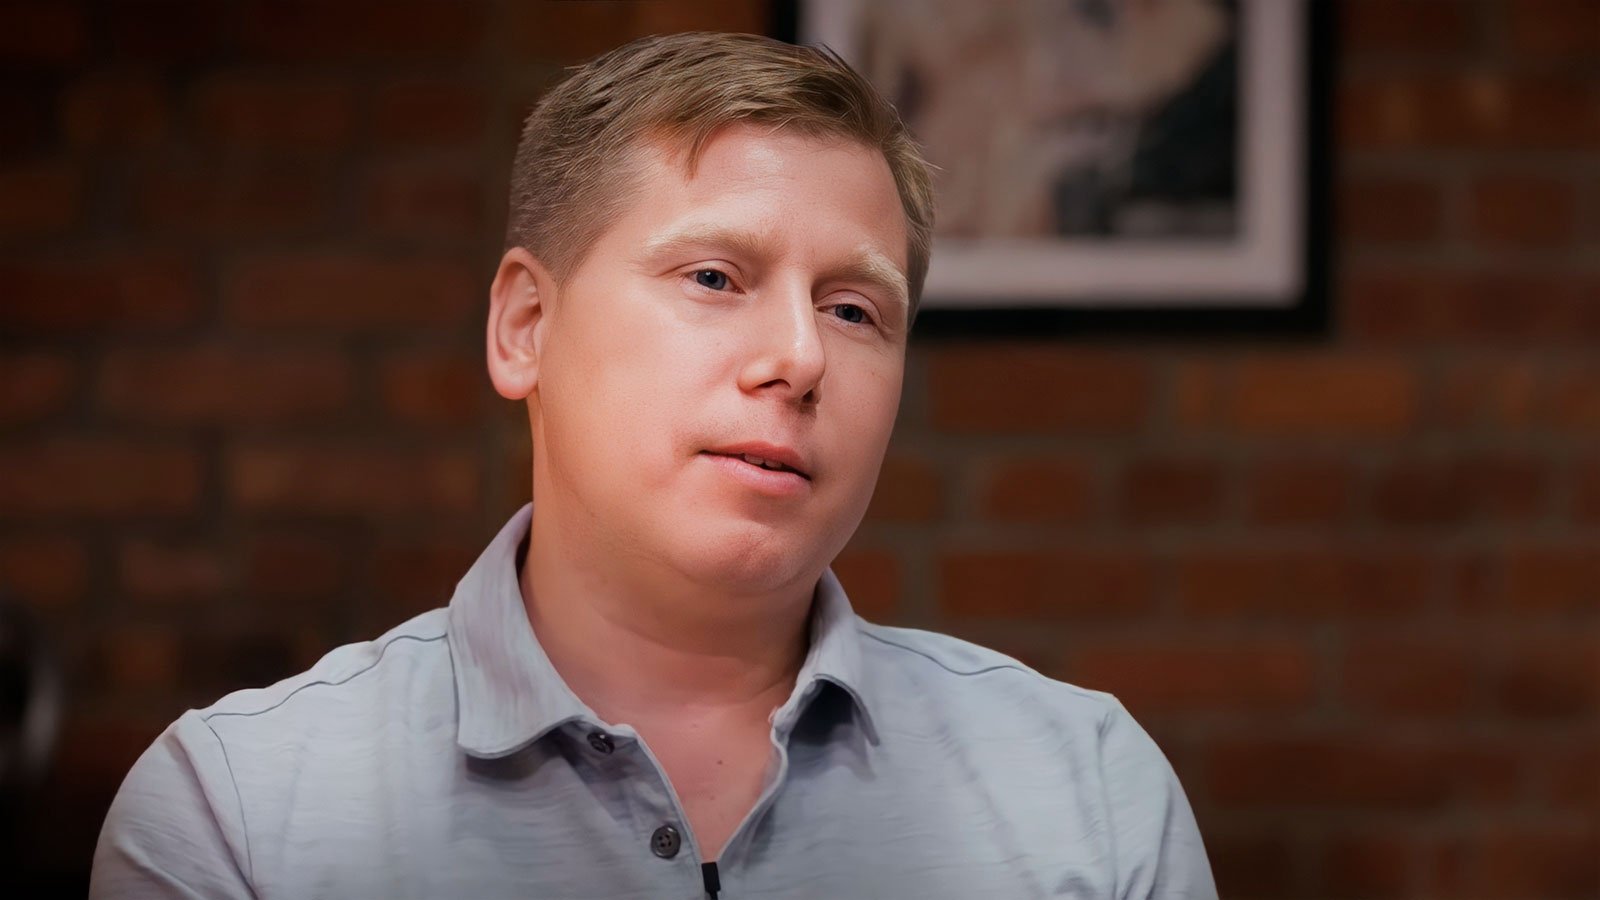 Bitcoin Coming to Central Banks? Barry Silbert Explains Why Blackrock News Is Big Deal